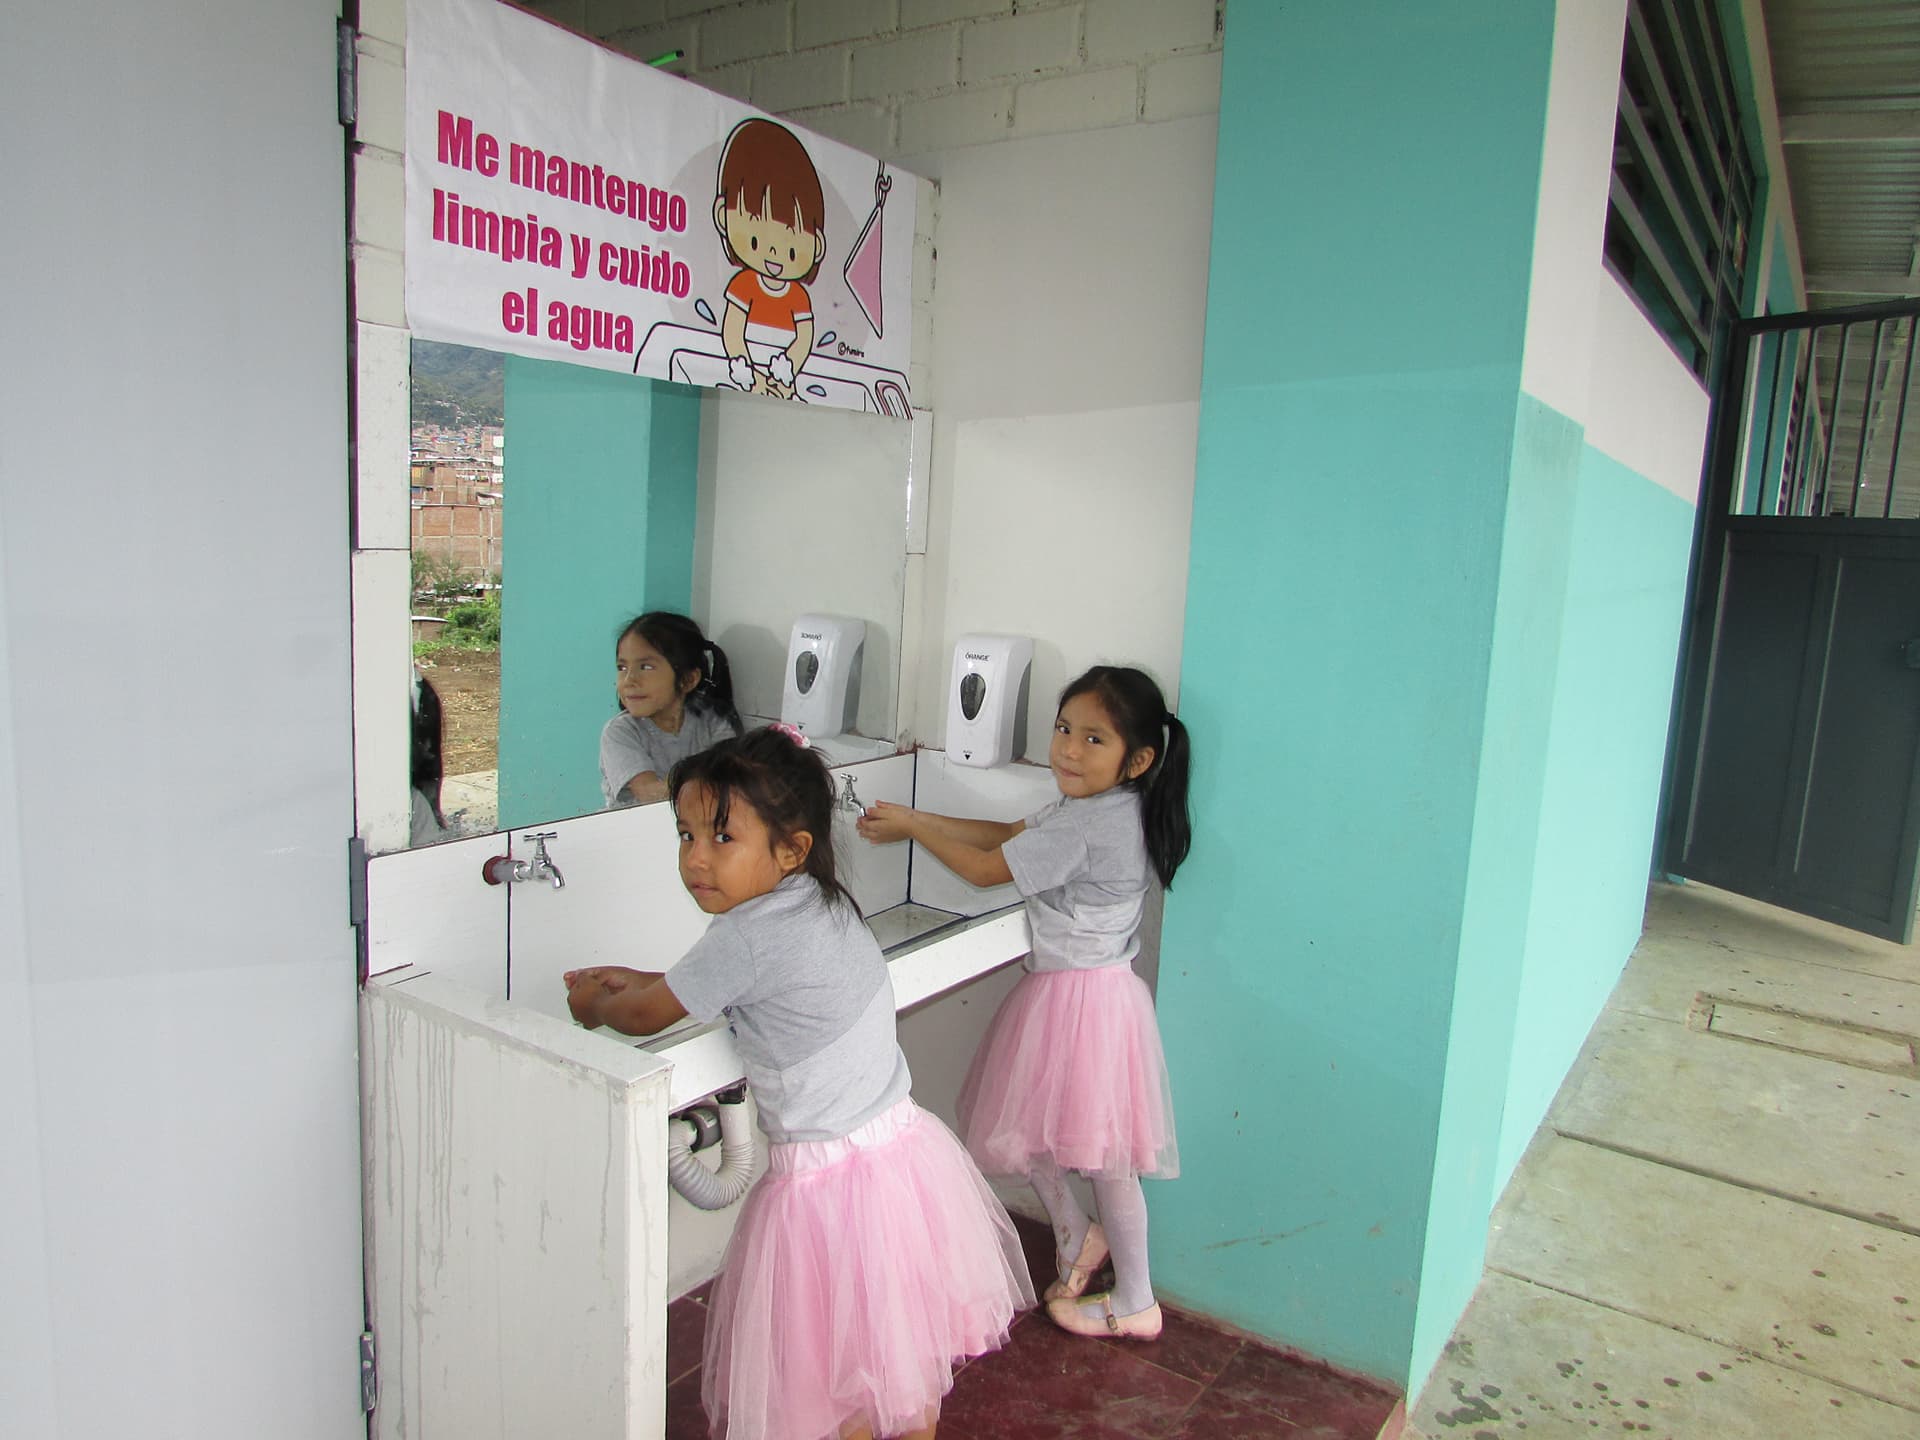 Two girls in pink dresses stand at the church sink and wash their hands